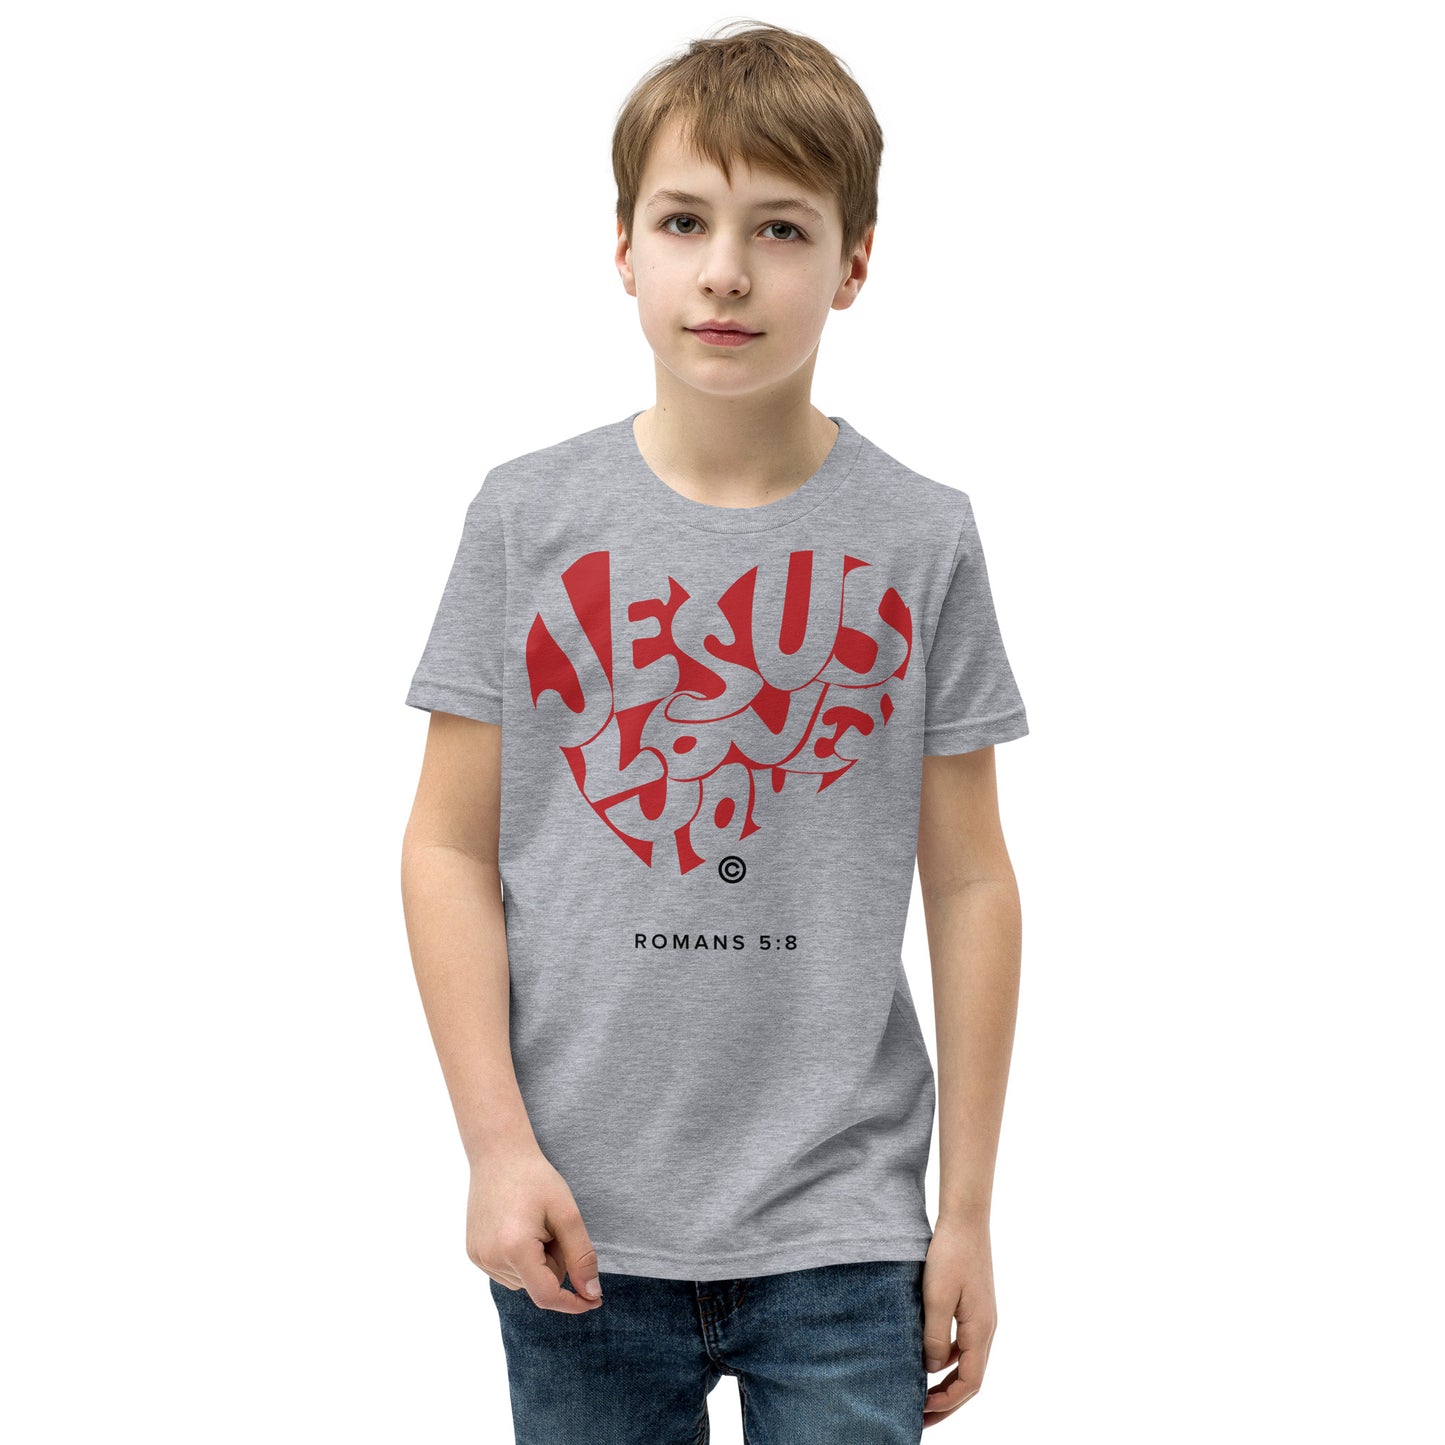 Jesus Loves You Youth Short Sleeve T-Shirt